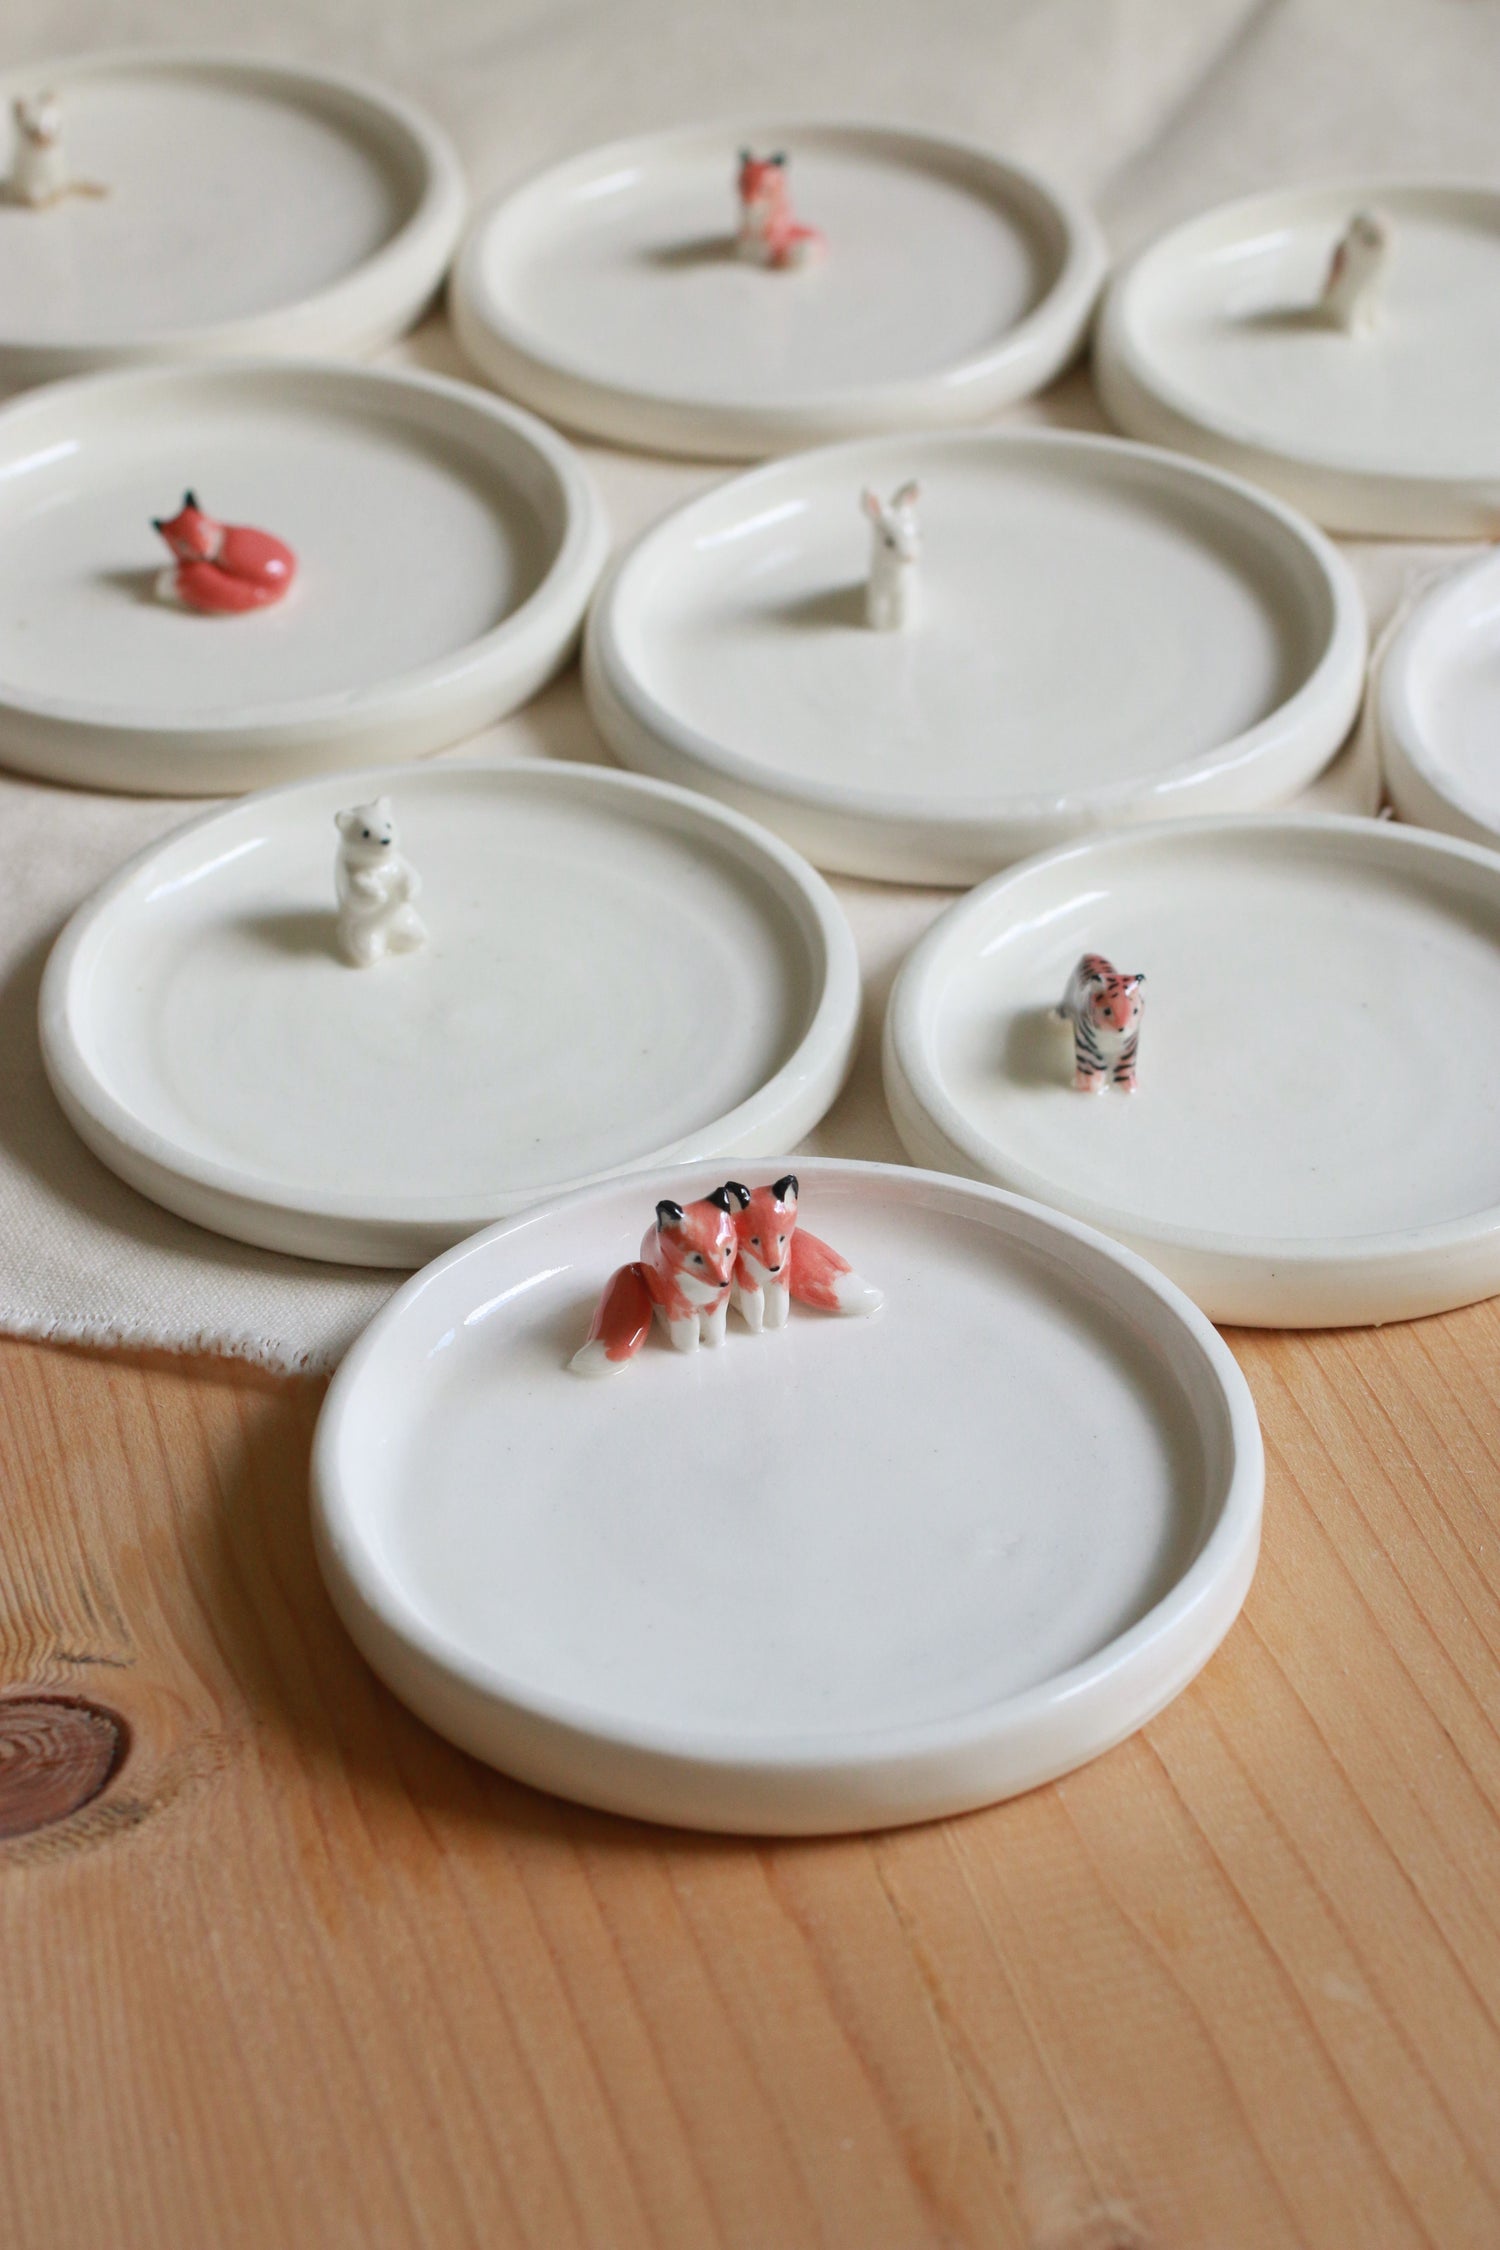 Jewelry dishes